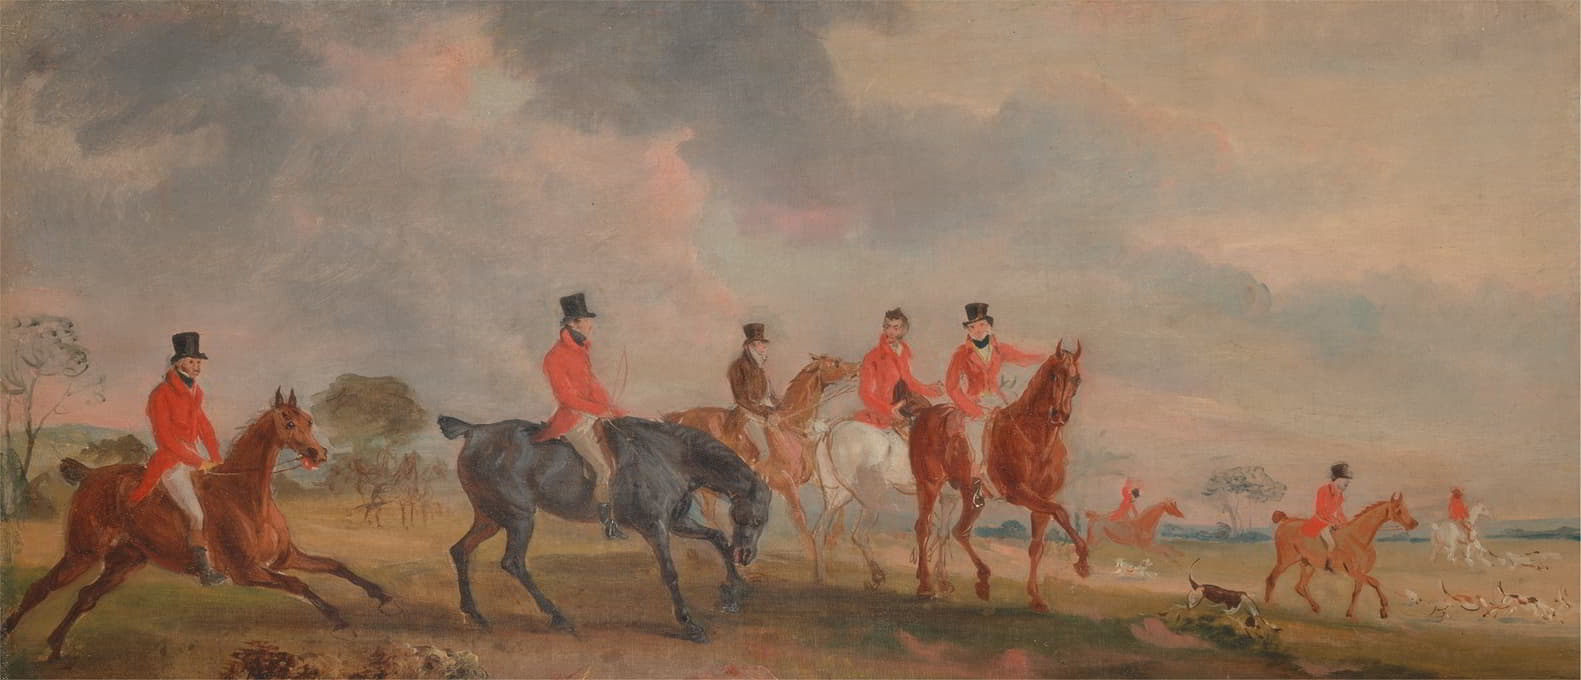 John Ferneley - The Quorn Hunt; a Sketch of the Artist and his Friends Moving Off